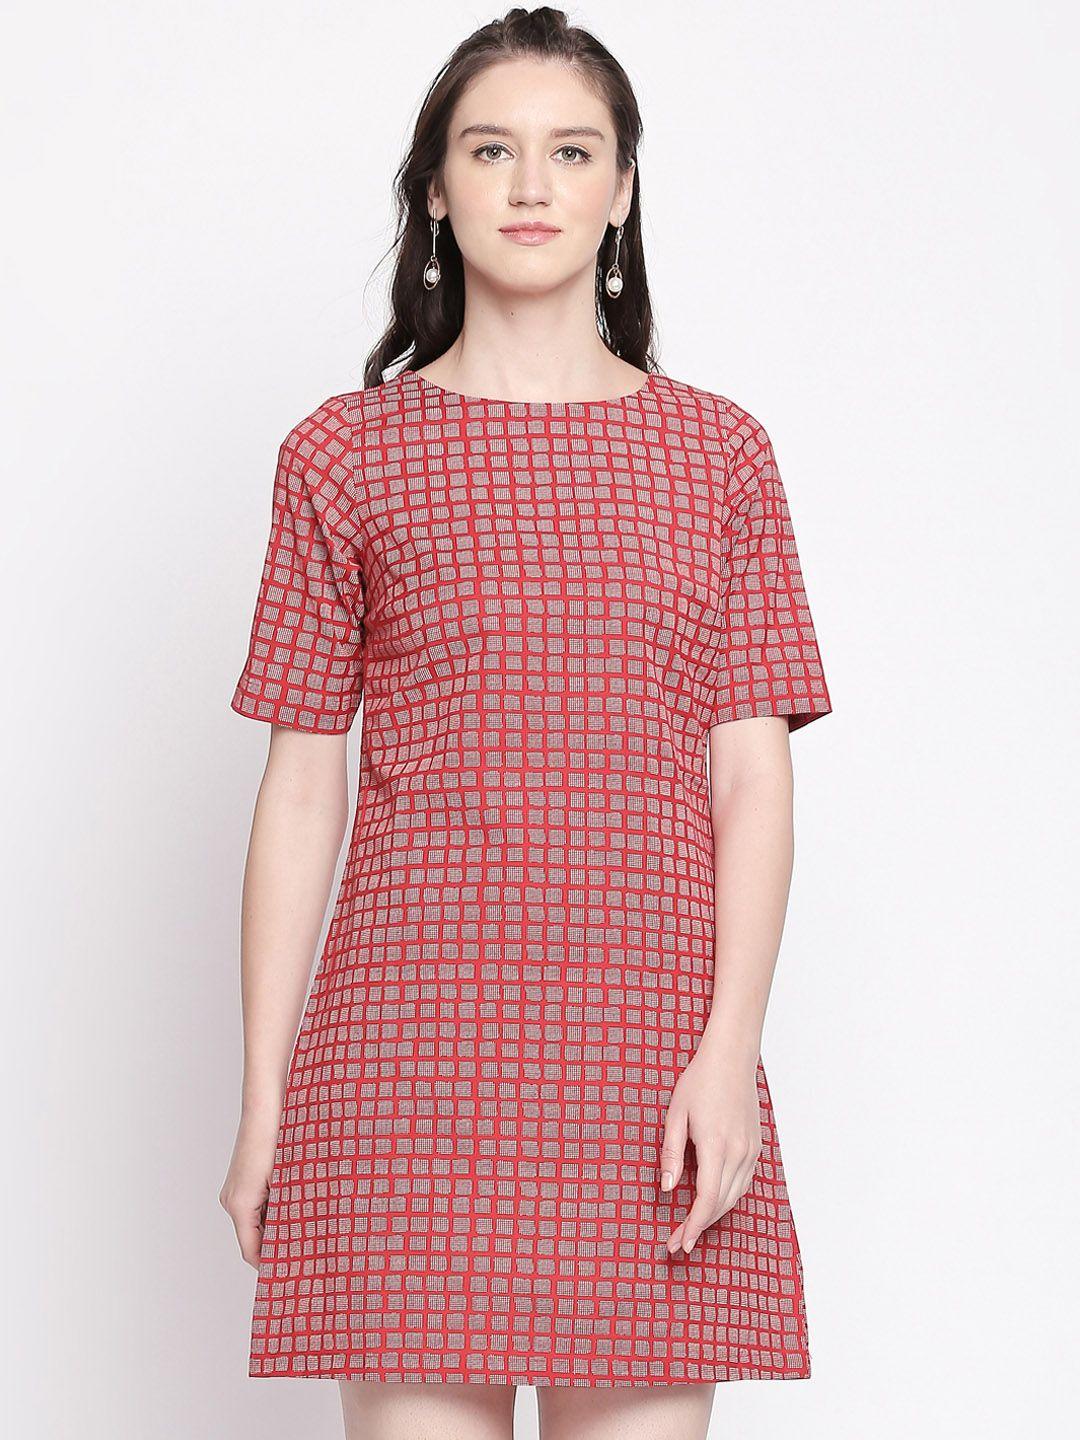 akkriti by pantaloons women red & white checked fit and flare dress